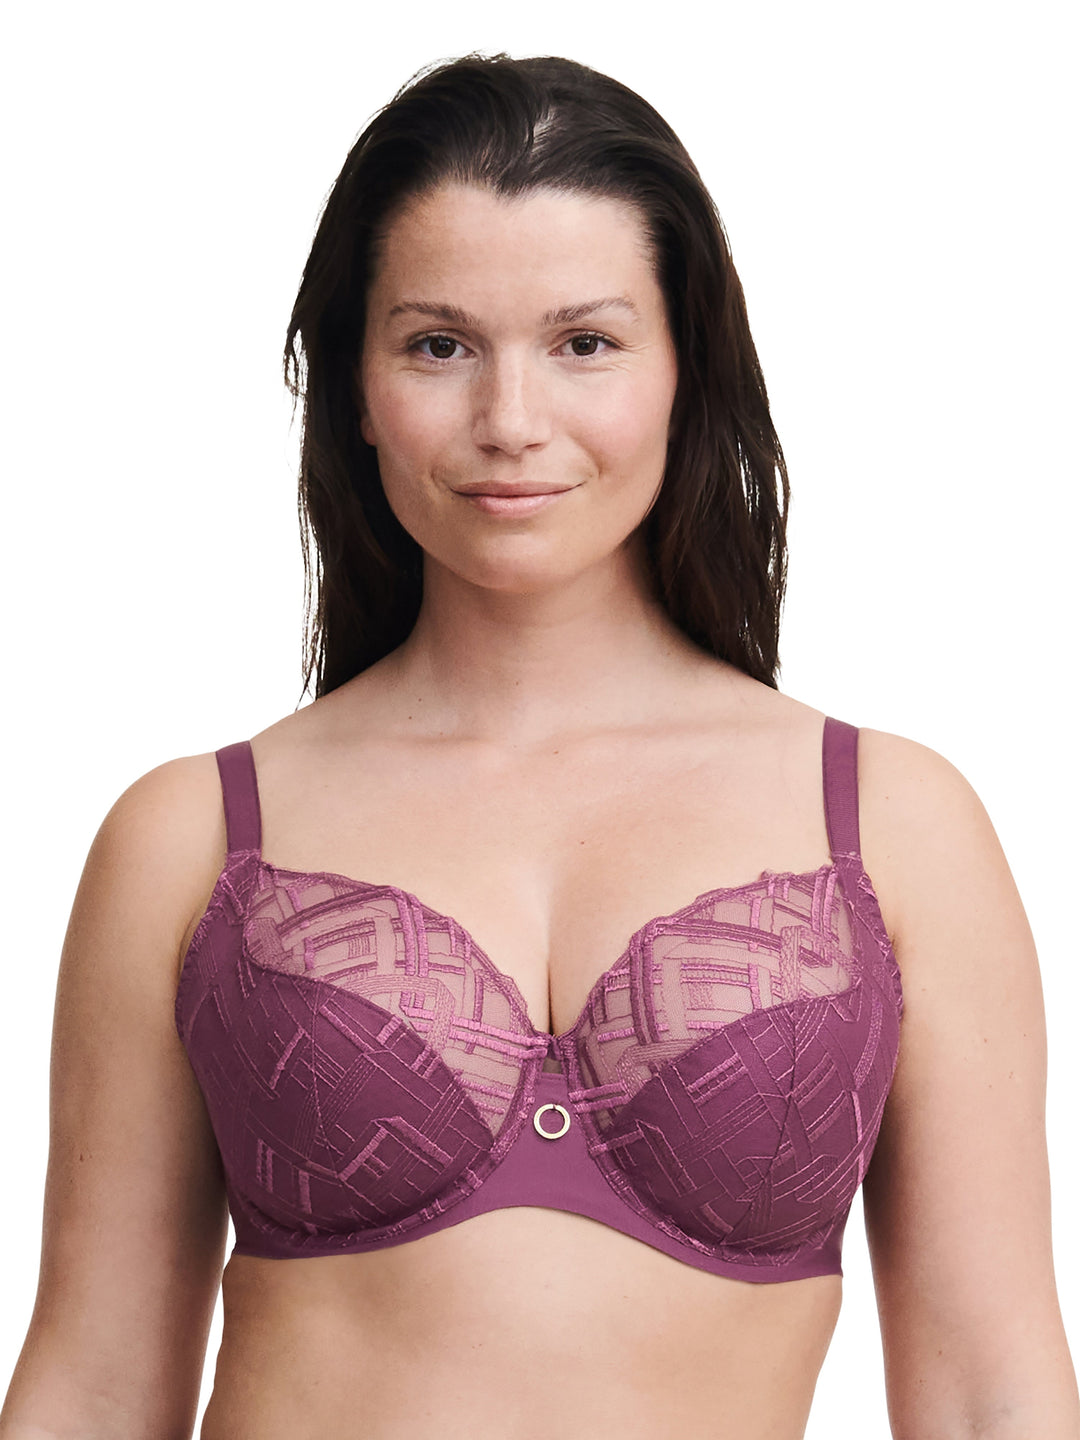 Chantelle - Graphic Support Very Covering Underwired Tannin Full Cup Bra Chantelle 